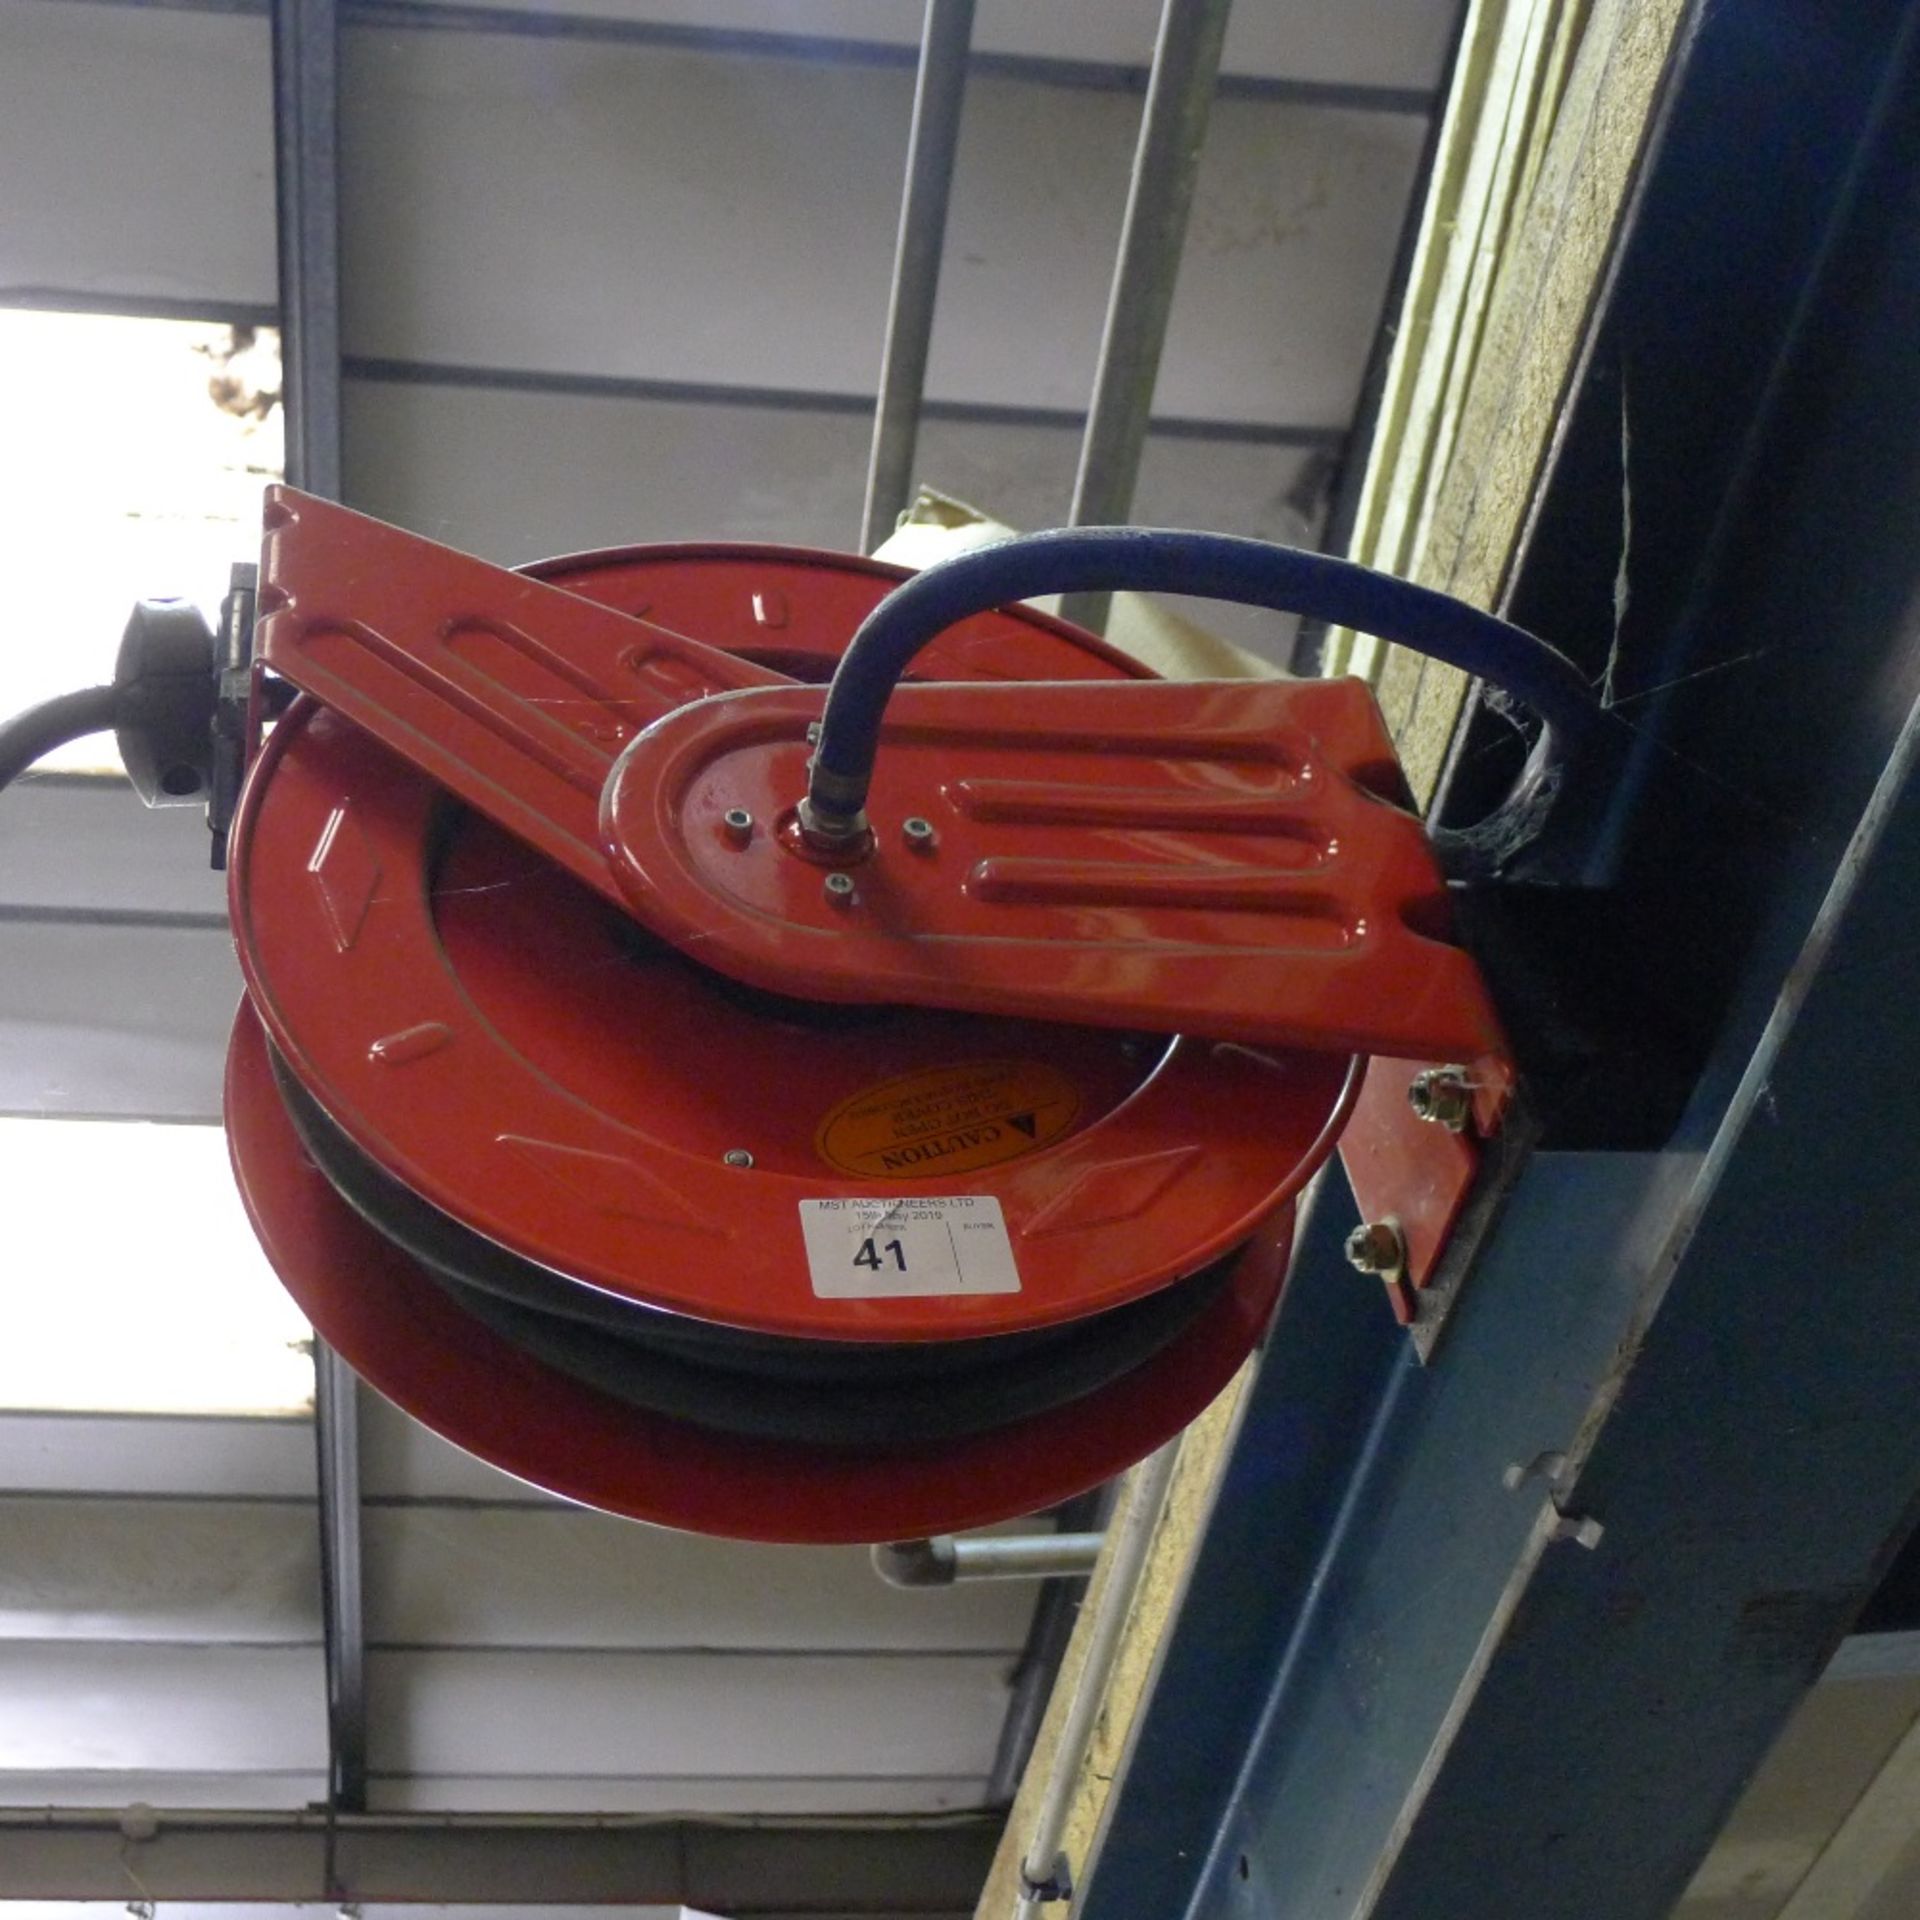 1 wall mounted retractable air hose on metal reel by Redashe - Image 3 of 3